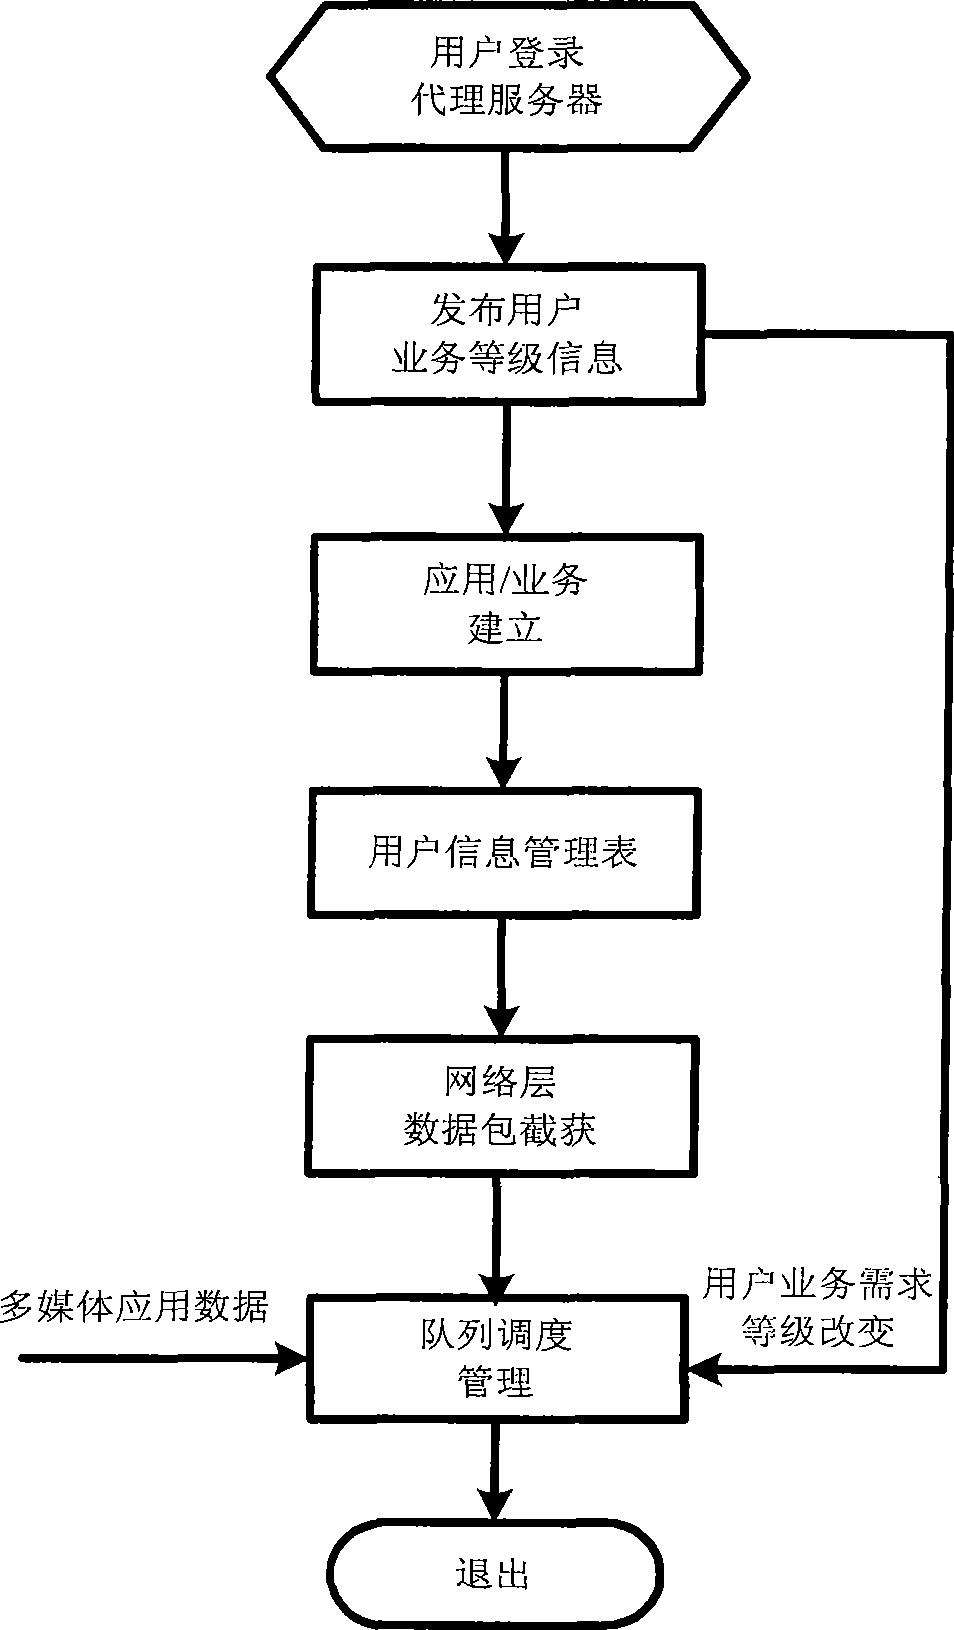 Service stream management method oriented to SIP application